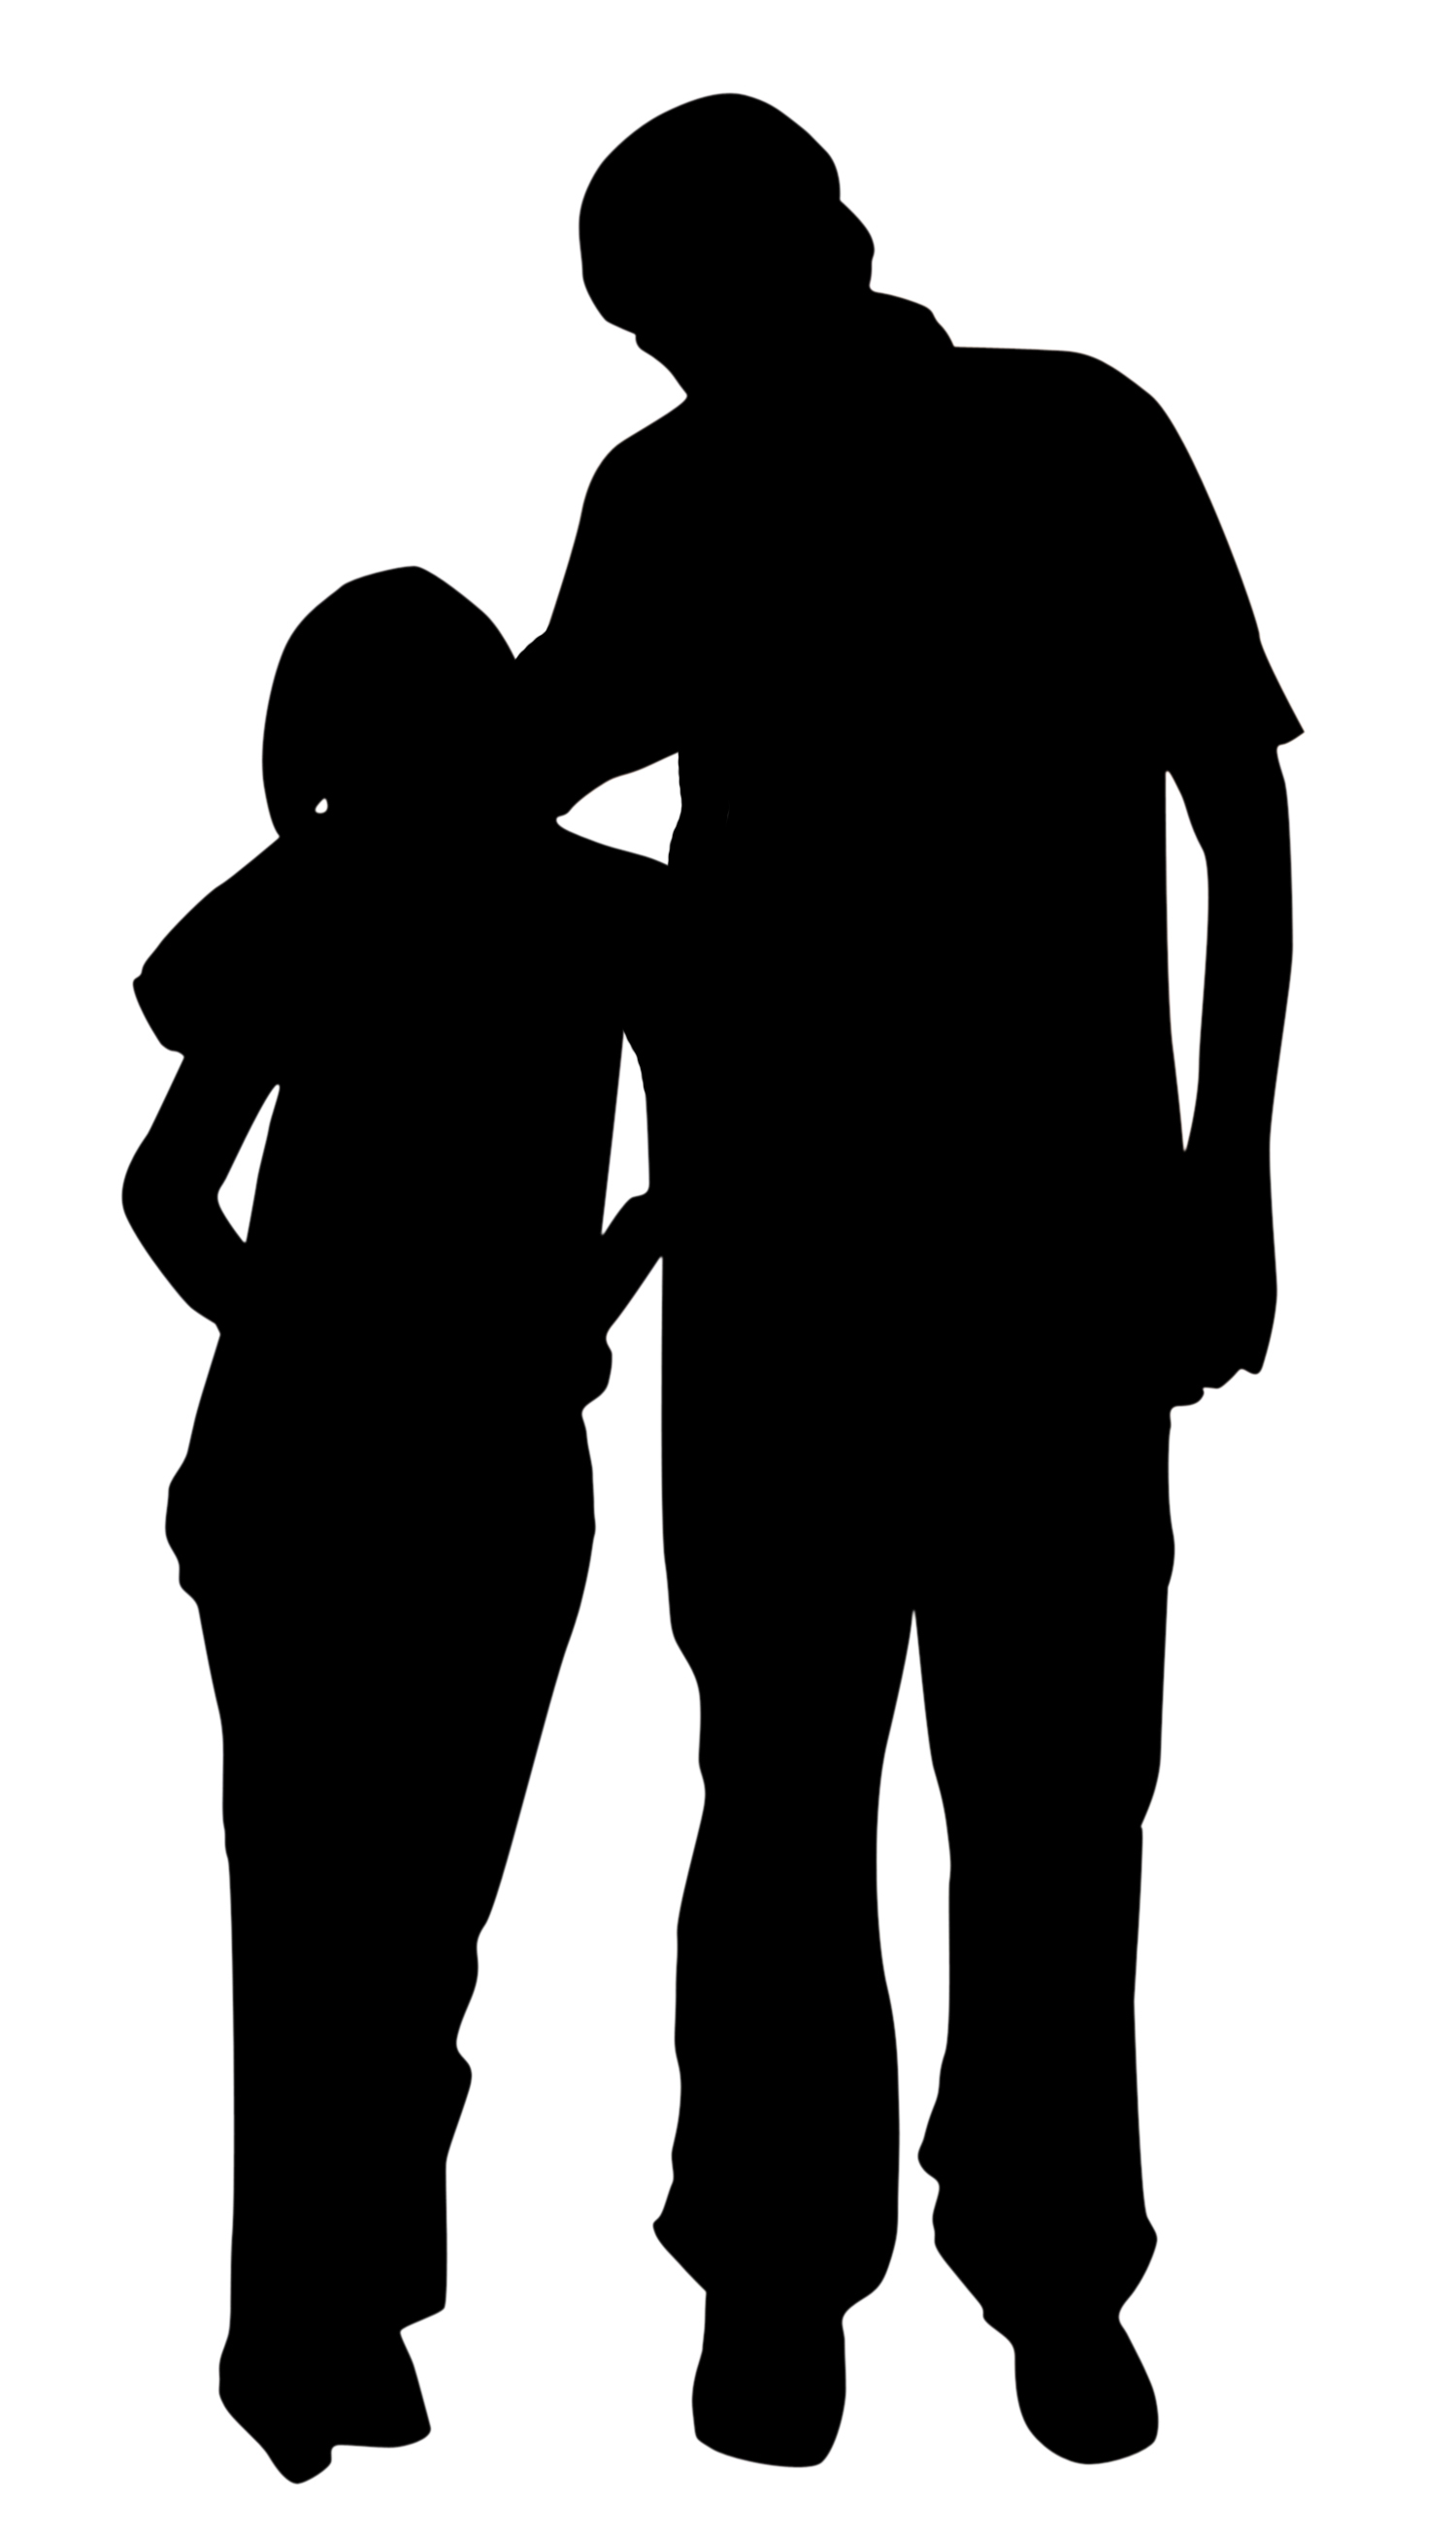 Dad and daughter silhouette | Behance :: Behance